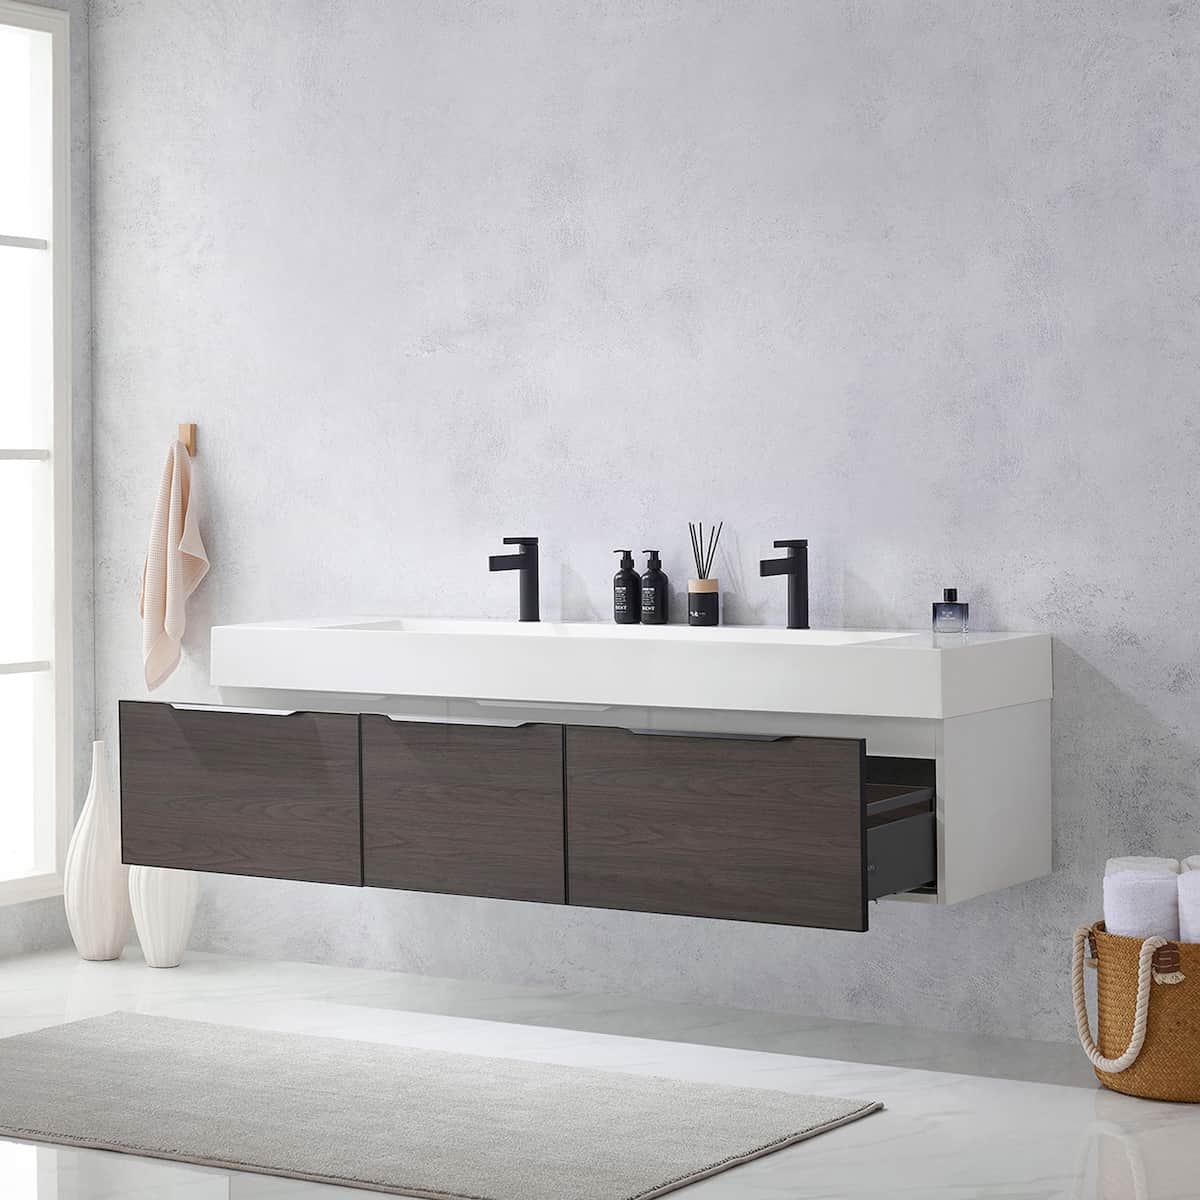 Vinnova Vegadeo 72 Inch Wall Mount Double Sink Bath Vanity in Suleiman Oak Finish with White One-Piece Composite Stone Sink Top Without Mirror Drawers 703472-SO-WH-NM